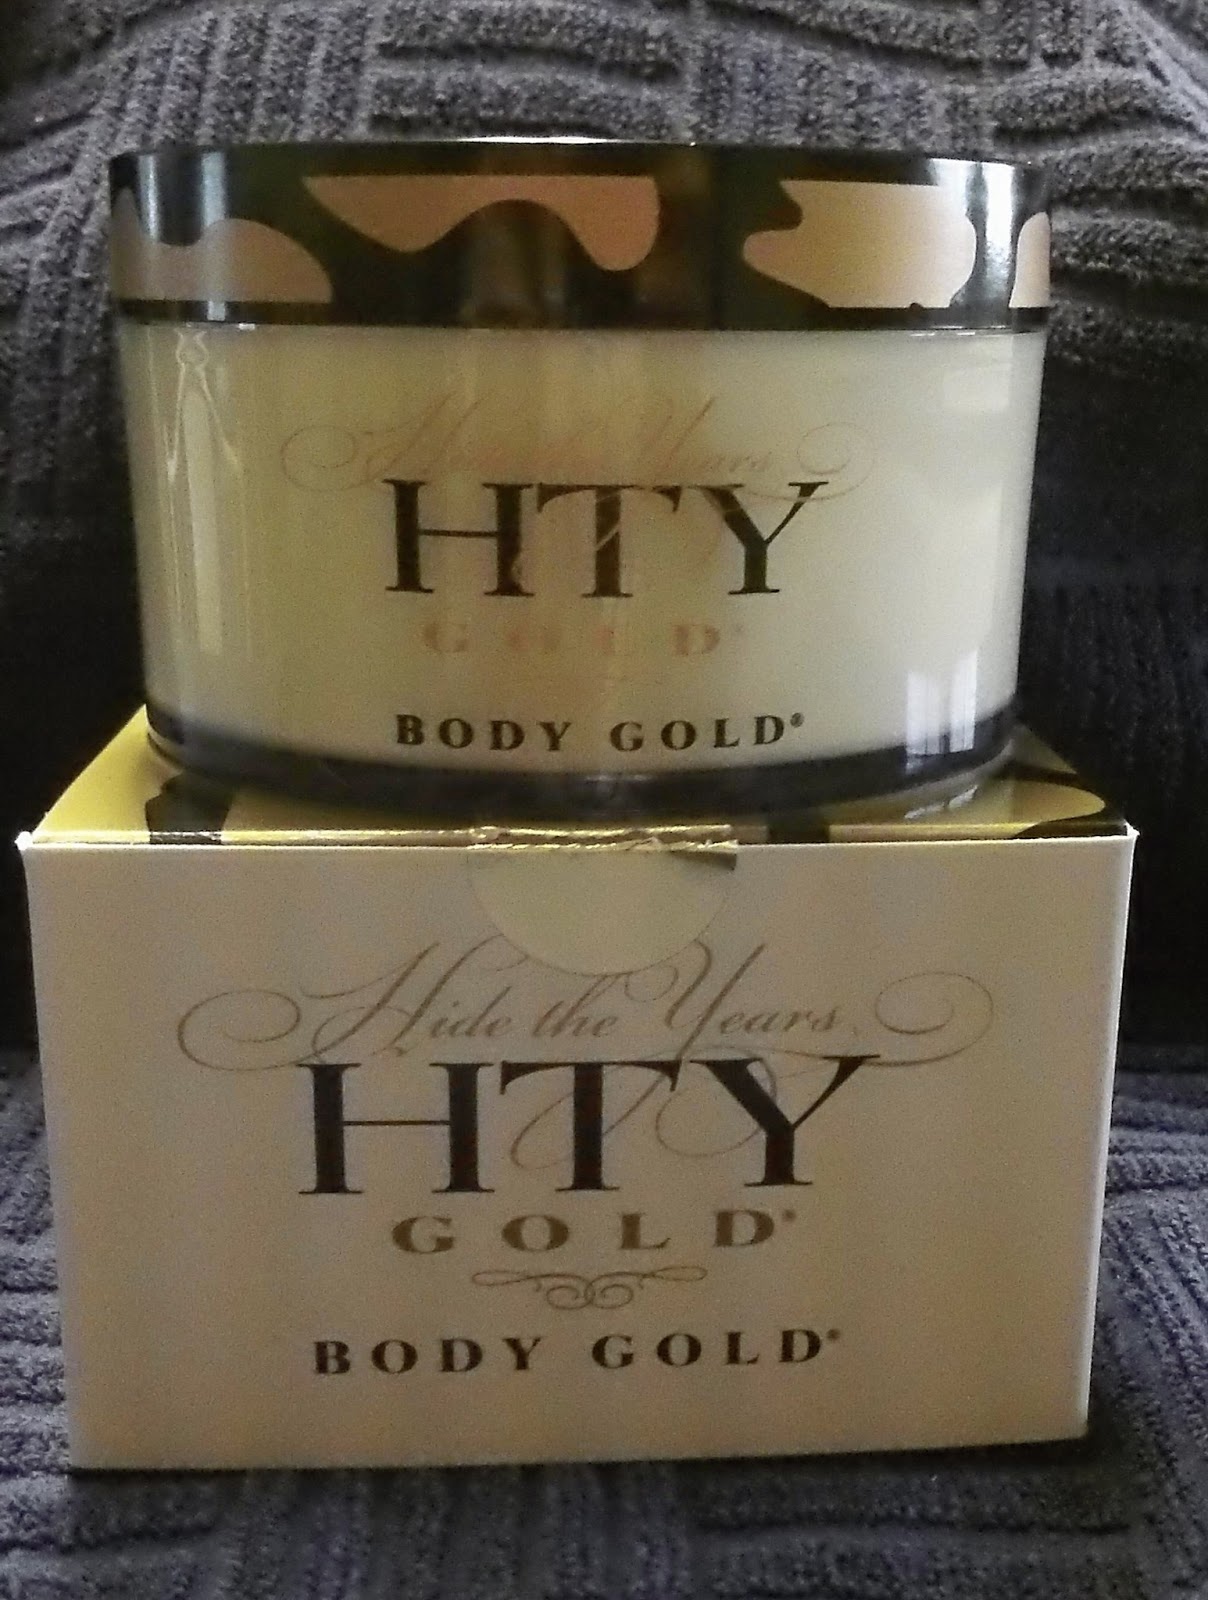 HTY Gold Body Gold Review